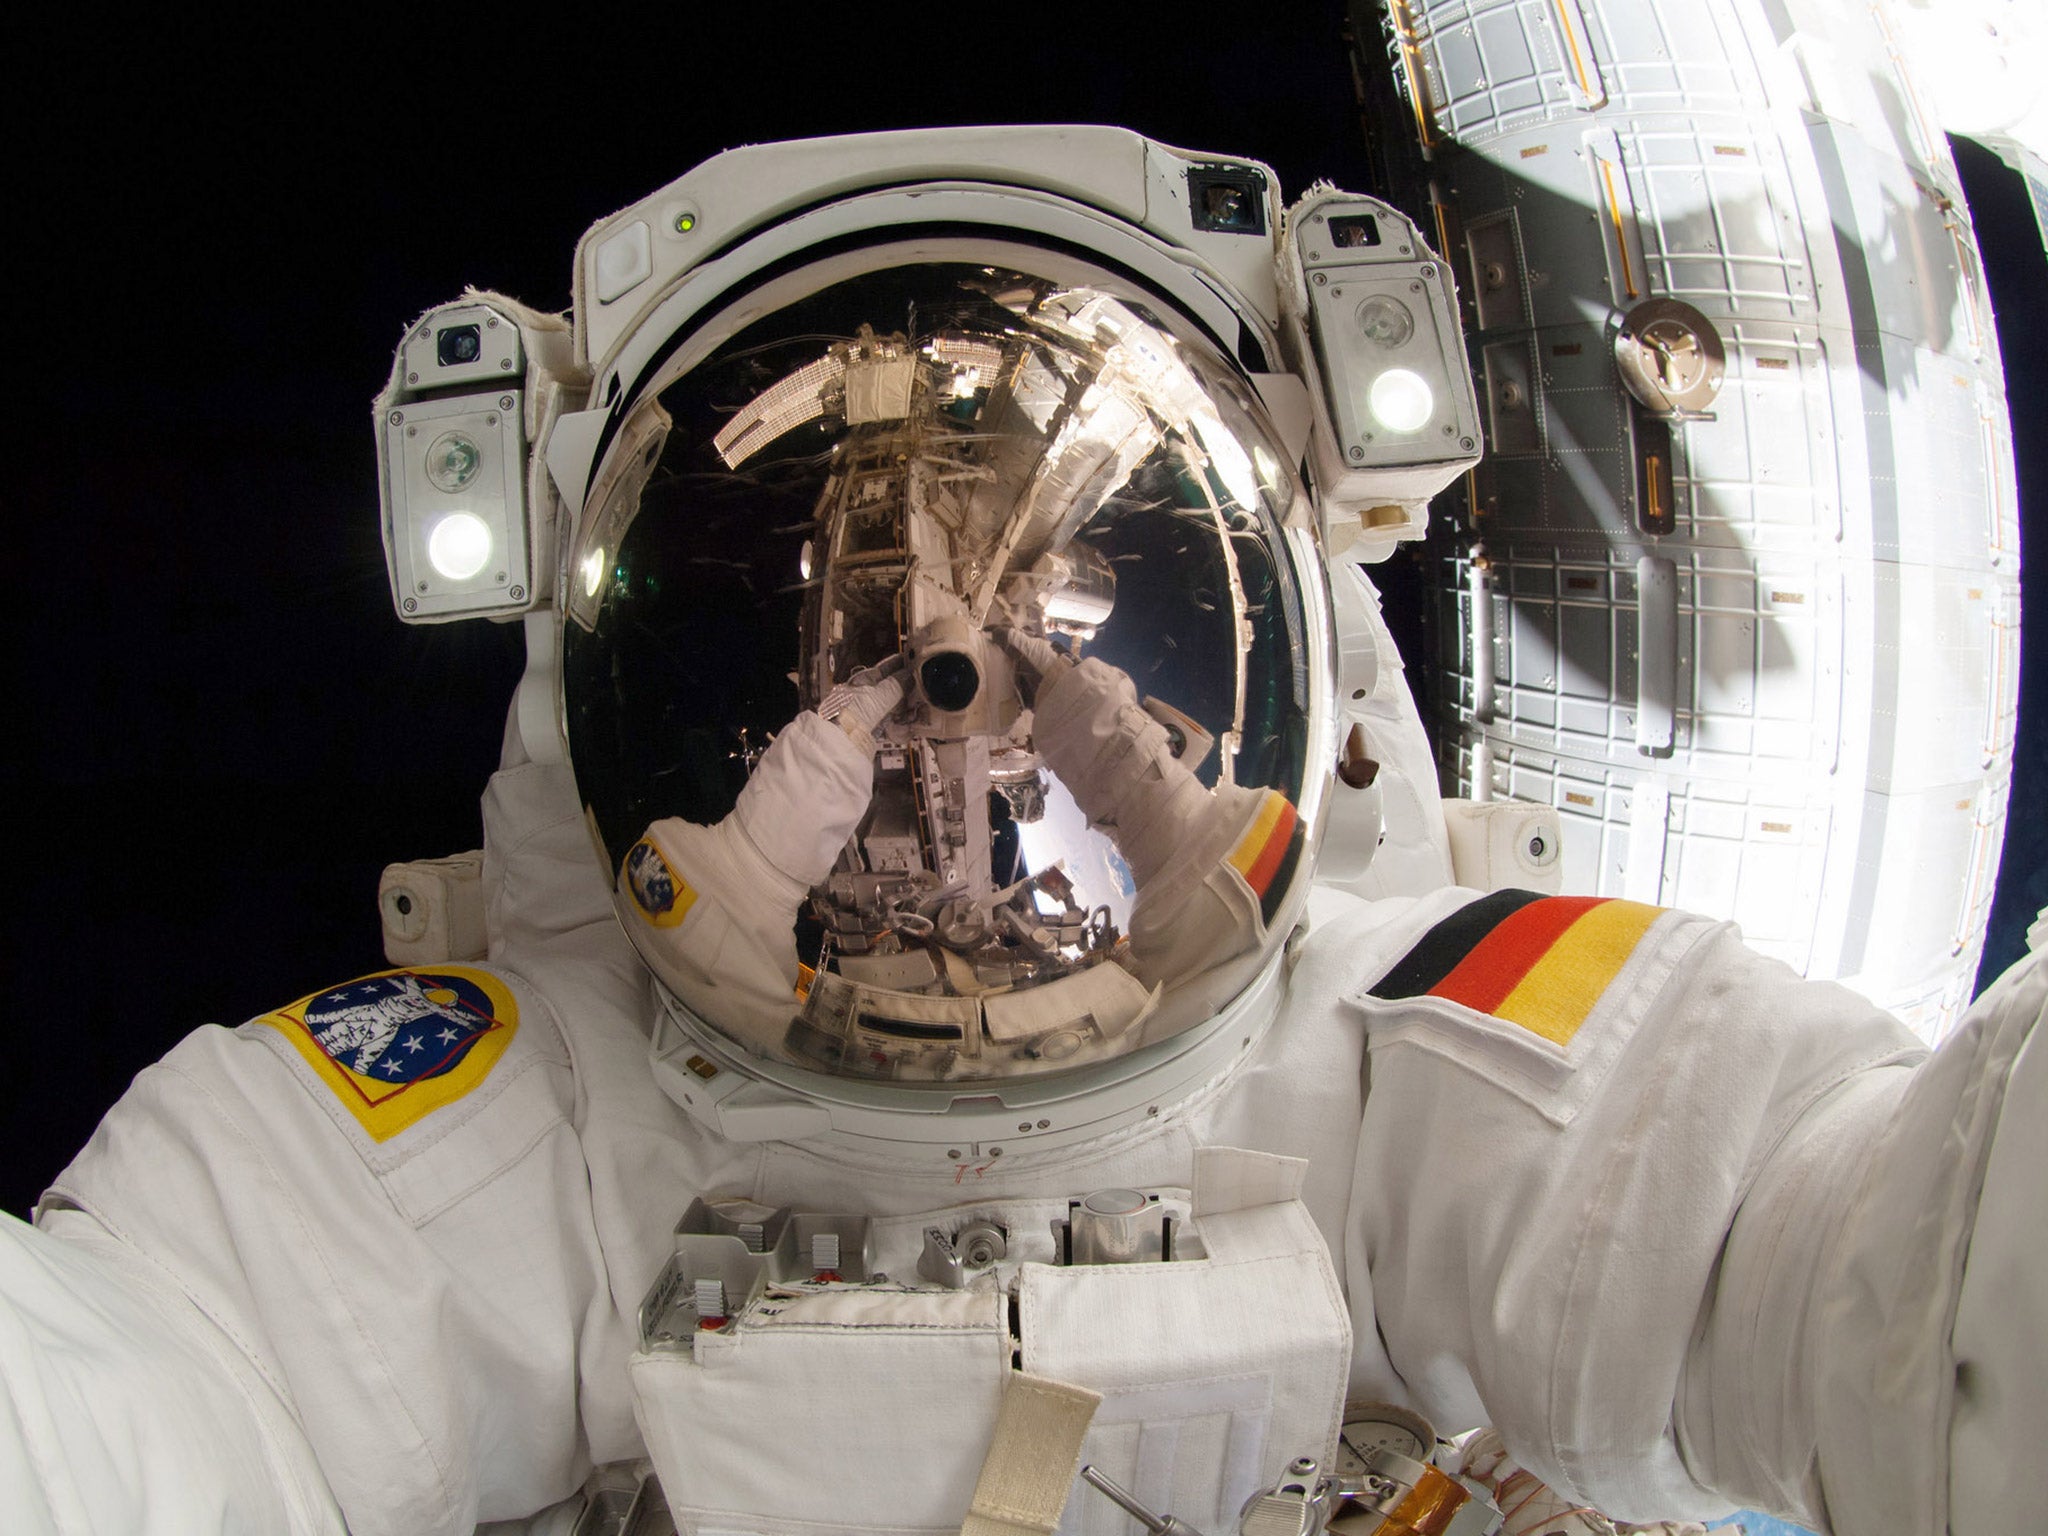 Astronauts could suffer brain damage on long trips, a study has found